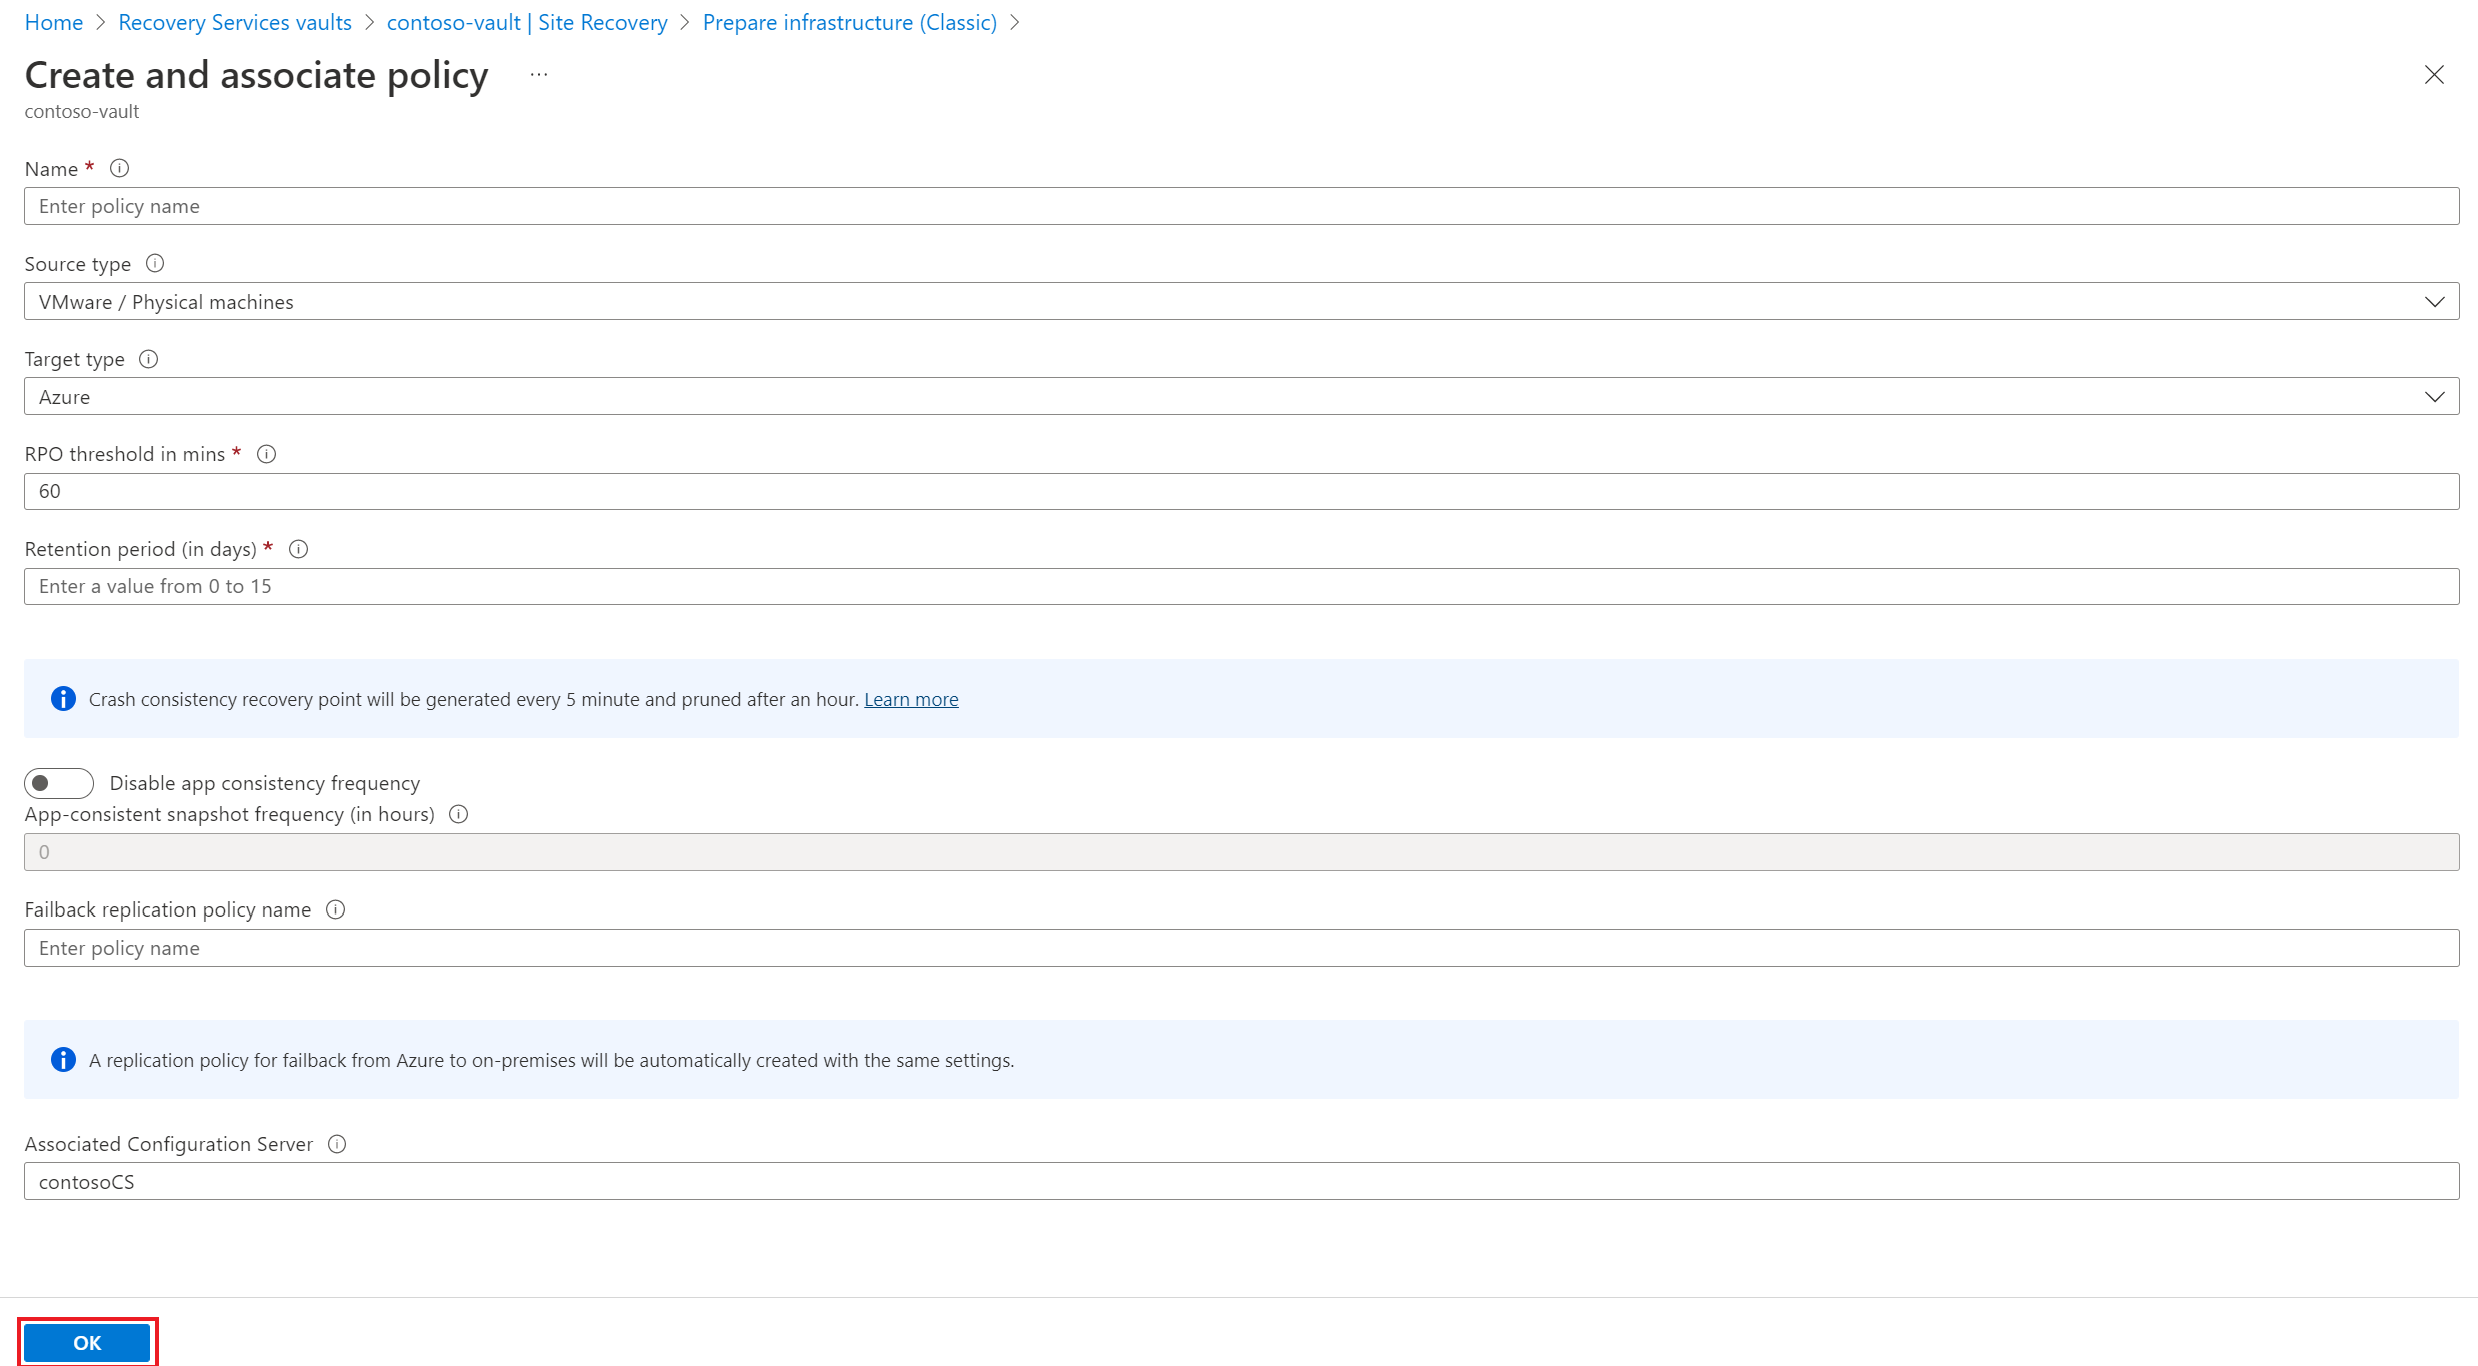 Screenshot of replication policy page.